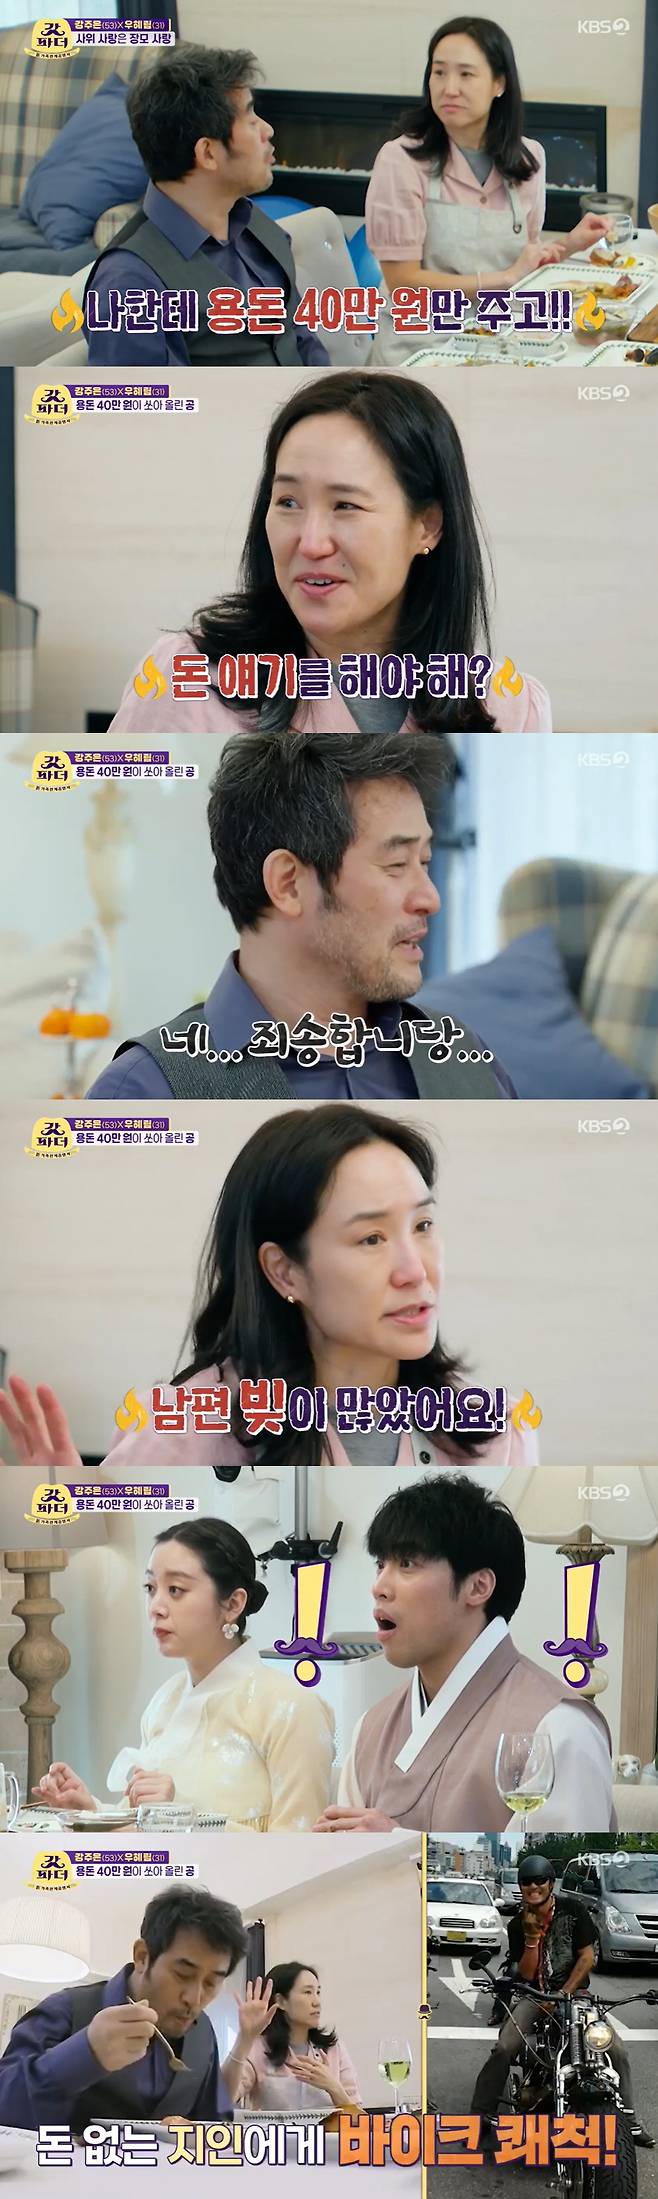 Kangju, a former Miss Korea, expressed frustration with the writings of actor Choi Min-soo, her husband.Kangju, Choi Min-soo, and Hyelim and Shin Min-cheol met on the KBS2 entertainment program The New Family Relationship Certificate The Last Godfather (hereinafter referred to as The Last Godfather) on the 16th.Kangju invited his daughter Hyelim to her home, so she moved busily, making food preparations with Choi Min-soo.Hyelim, who arrived at Kangju house with her husband Shin Min-cheol, attracted attention by wearing a pretty hanbok.Because it was New Years Day at the time of shooting, Hyelim and Shin Min-cheol tripled Kangju and Choi Min-soo. Kangju, who watched it, said, I suddenly got salty.I am so happy, he said. I have a daughter so I can not imagine. I am so impressed by the fact that my daughter and son-in-law are tripled.I hope it will be a year to save each other, he said.Shin Min-chul I prepared my allowance and handed the envelope to Kangju, and Hyelim presented the lettering cake to Choi Min-soo, adding a cheerful atmosphere.They also left their first family photo.Unlike everyones response to the meal time and the Kangju table food, Choi Min-soo said, I baked it for too long, it looks like leather to me.When the atmosphere froze, Shin said, I like Weldon. I envy my father-in-law because I can always eat delicious food. I feel the wall for my mother-in-law. Perfect!I laughed at the so-called main comment.Kangju said, No matter how hard I work, if the other person does not know it. Choi Min-soo said, The person who has the ability to judge gives me 400,000 won.Ive never seen my money before. But when Kangju asked, Do you want to do this? I immediately said, Im sorry.Kangju said, After marriage, I found out that my husband had a lot of debt. He said that the debt reached 30 or 4 billion.Choi Min-soo also added, I didnt know that my debt was that way either. Kangju said, My husband and close friend left with their husbands passbooks.My husband and I have a different concept of money: he enjoys his bike to an acquaintance who has no money, and he has several swords and knives for 10 million won.After 30 years, there is no concept (about money), he said unceasingly.Kangju also asked Shin Min-cheol, Did you have any debt at the time of marriage? Shin Min-cheol said, I did not have debt. I started to raise money properly from the age of 14.I am still pouring 3 million won a month, he surprised Kangju.